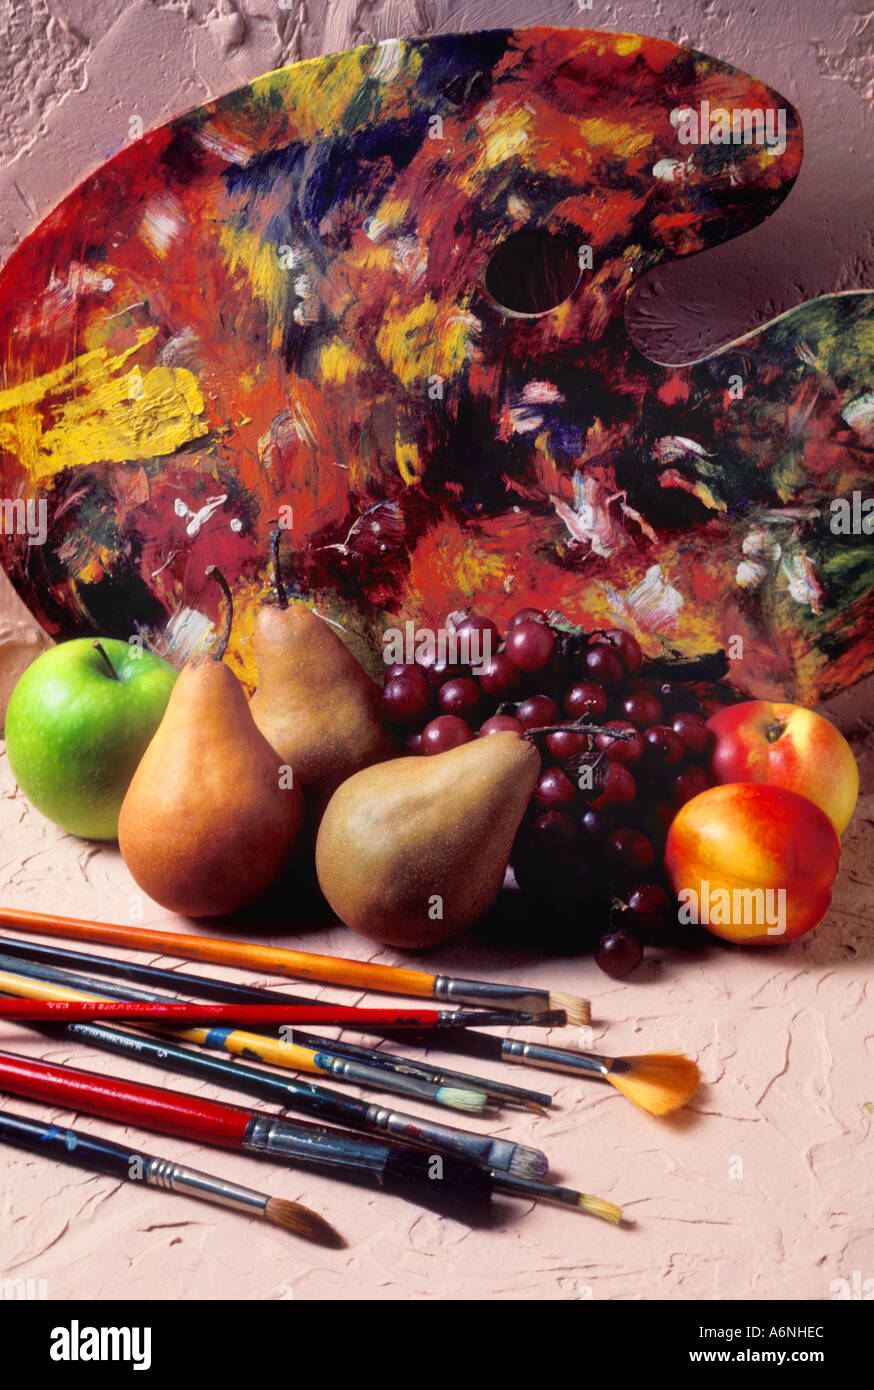 Painters palette with brushes and fruit Stock Photo